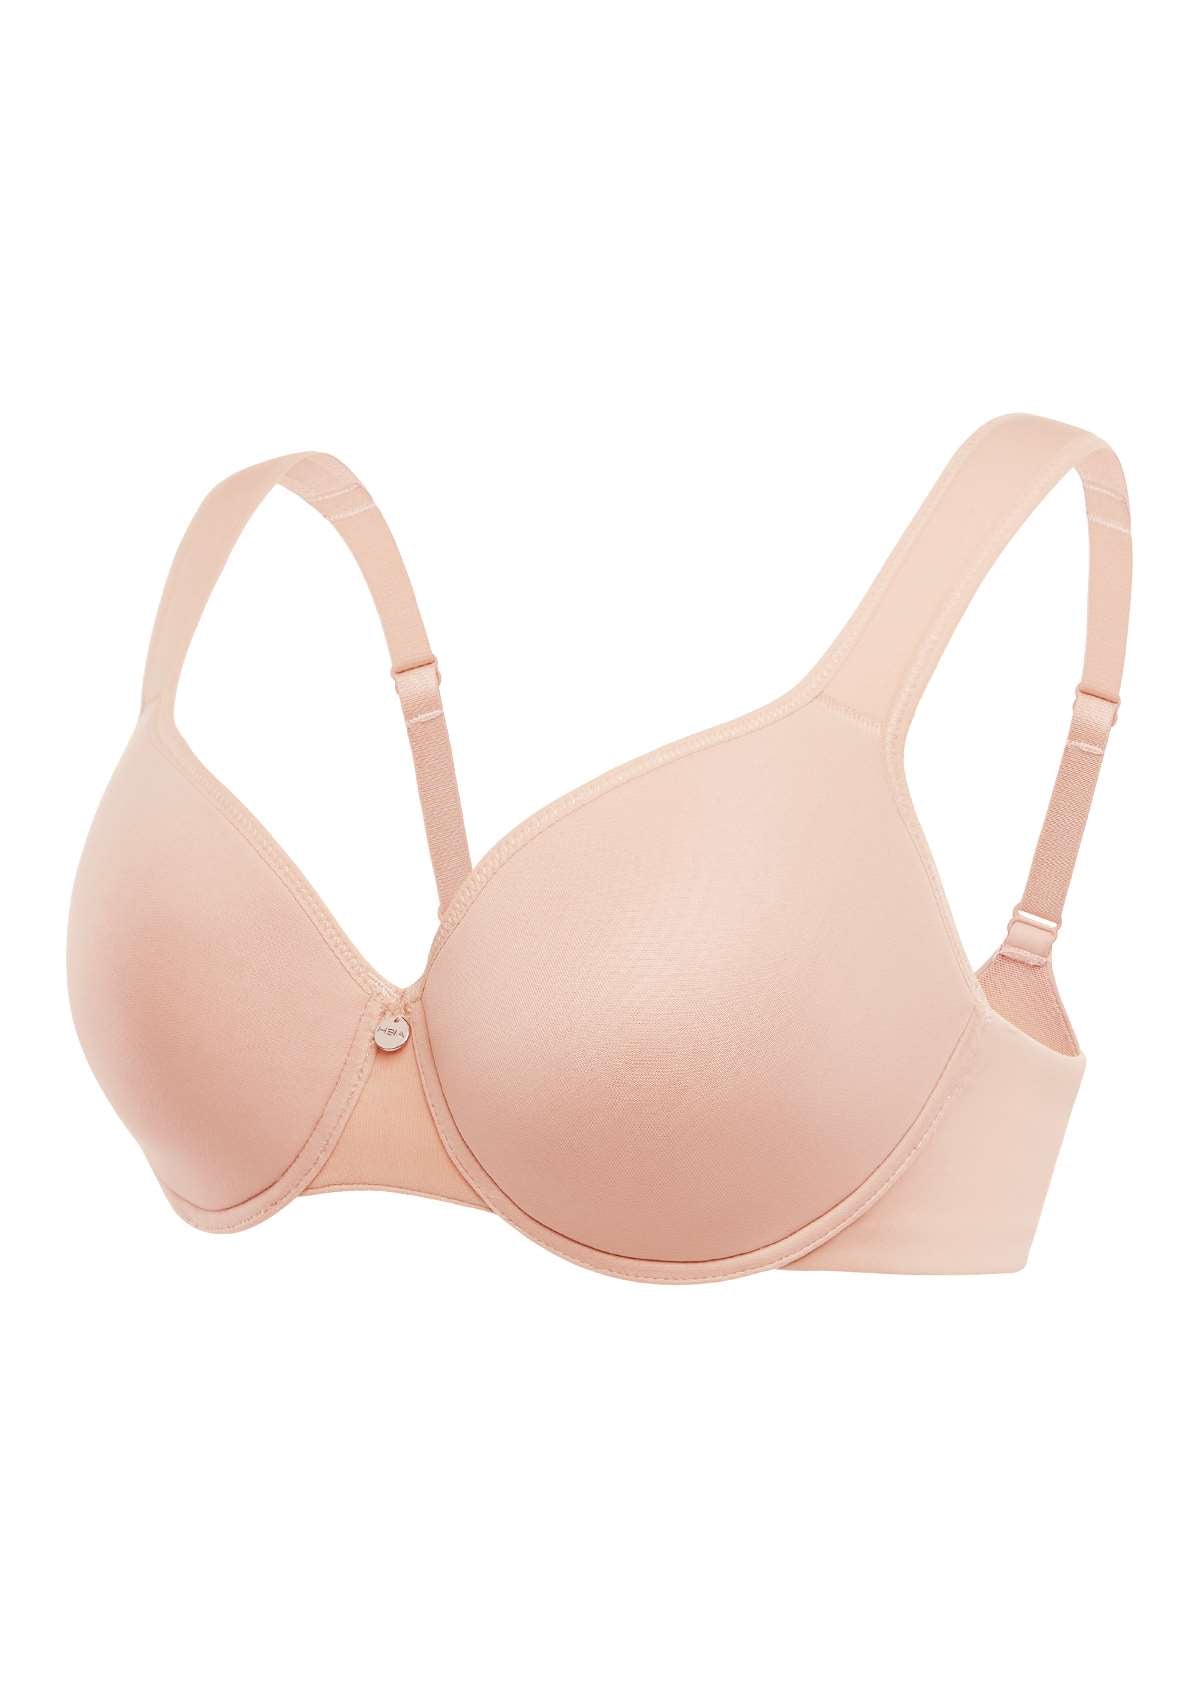 HSIA Patricia Smooth Classic T-shirt Lightly Padded Minimizer Bra - Light Pink / 38 / H